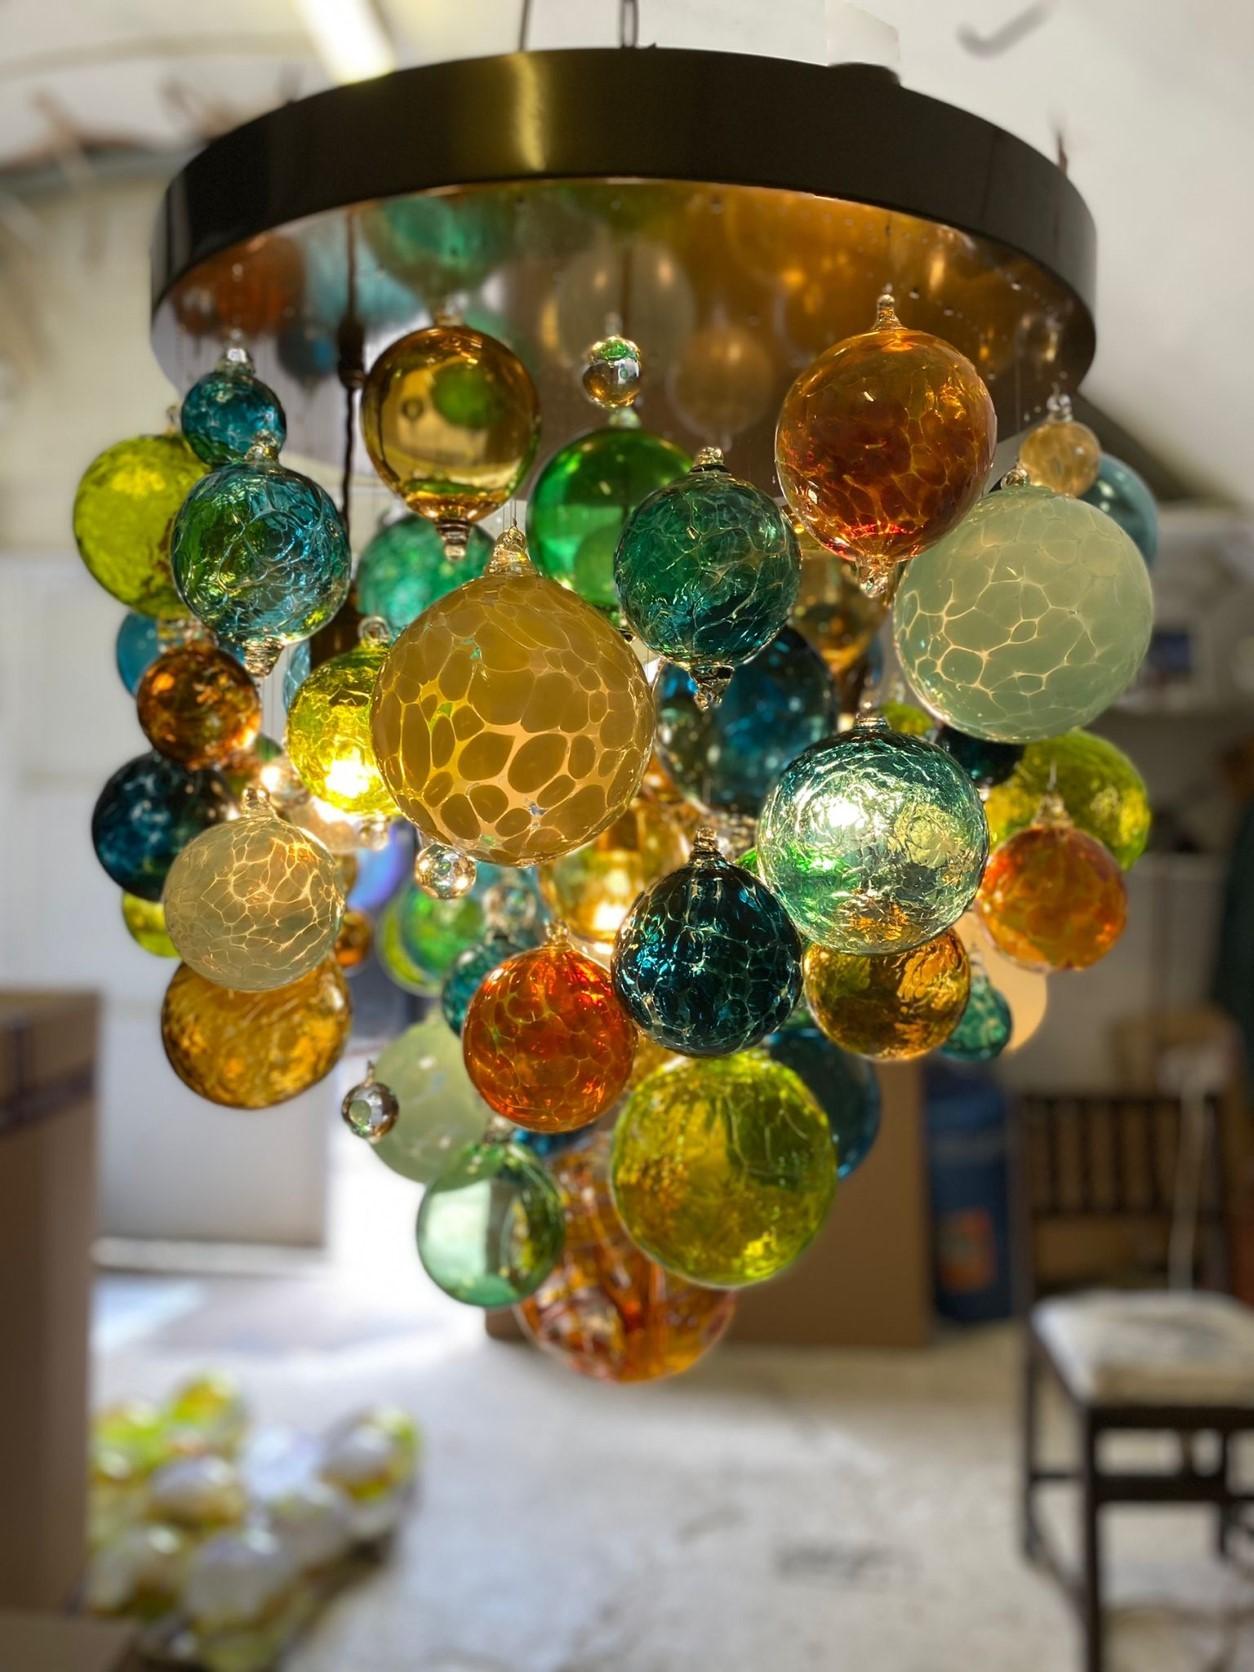 Origin II Chandelier by Roast Featuring over 50 Individually Blown Glass Spheres